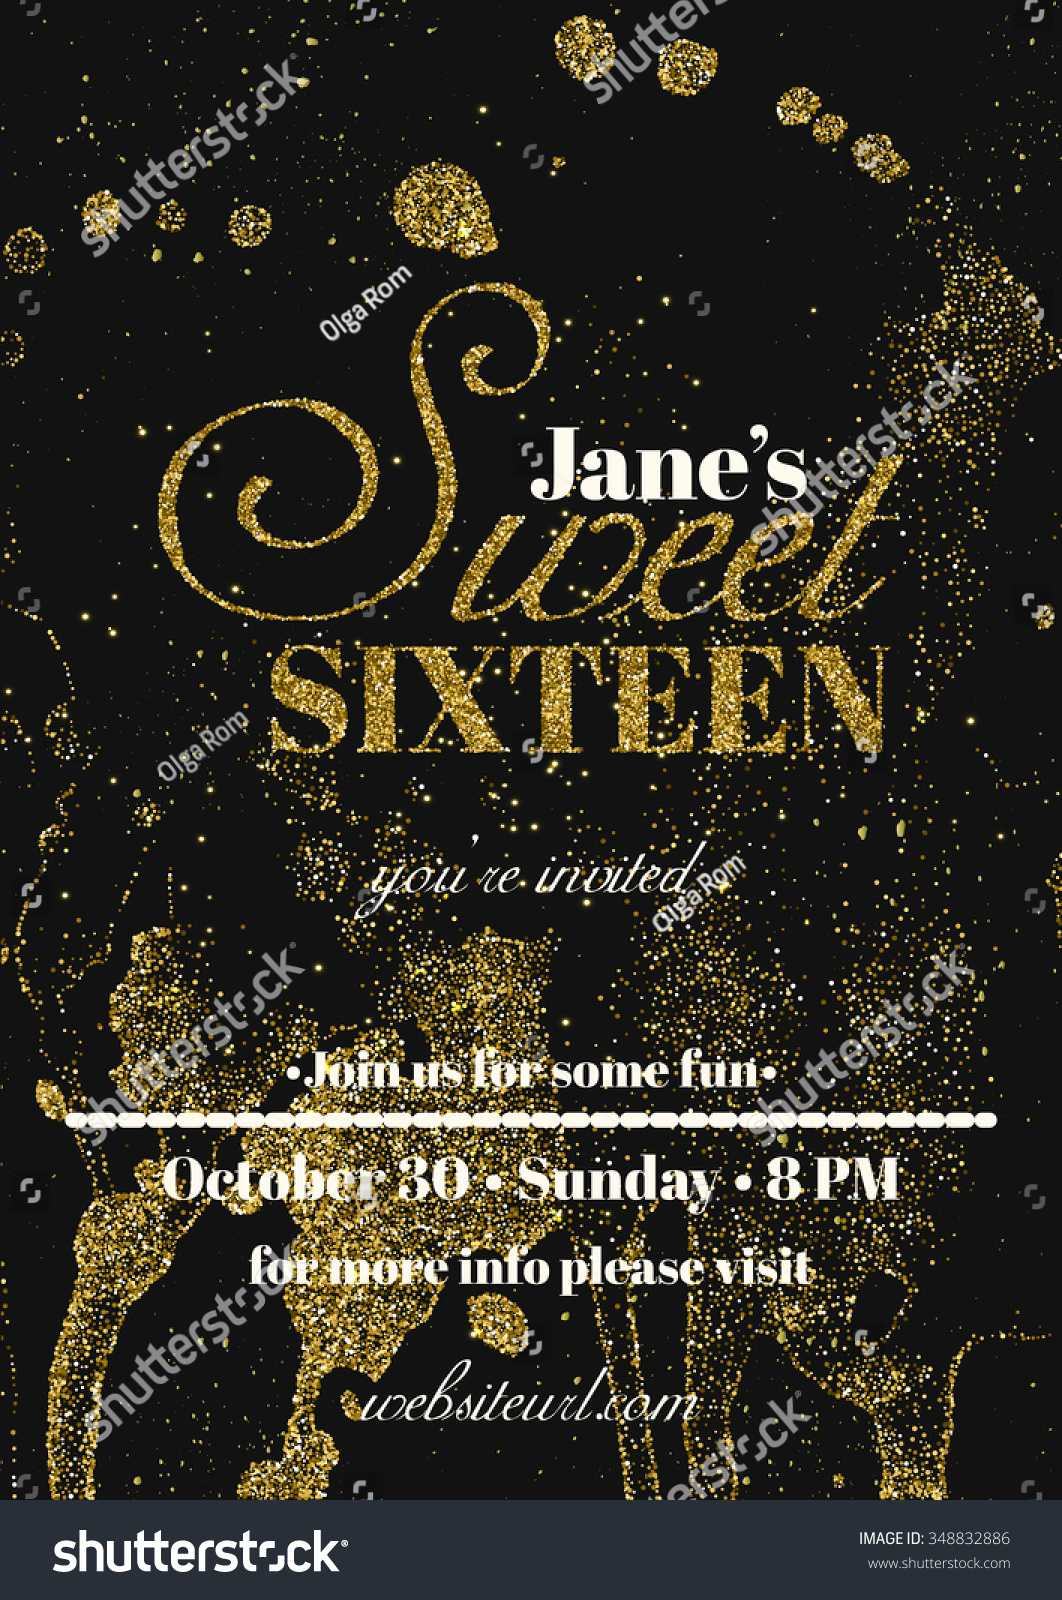 Sweet Sixteen Glitter Party Invitation Flyer Stock Vector Intended For Sweet 16 Banner Template